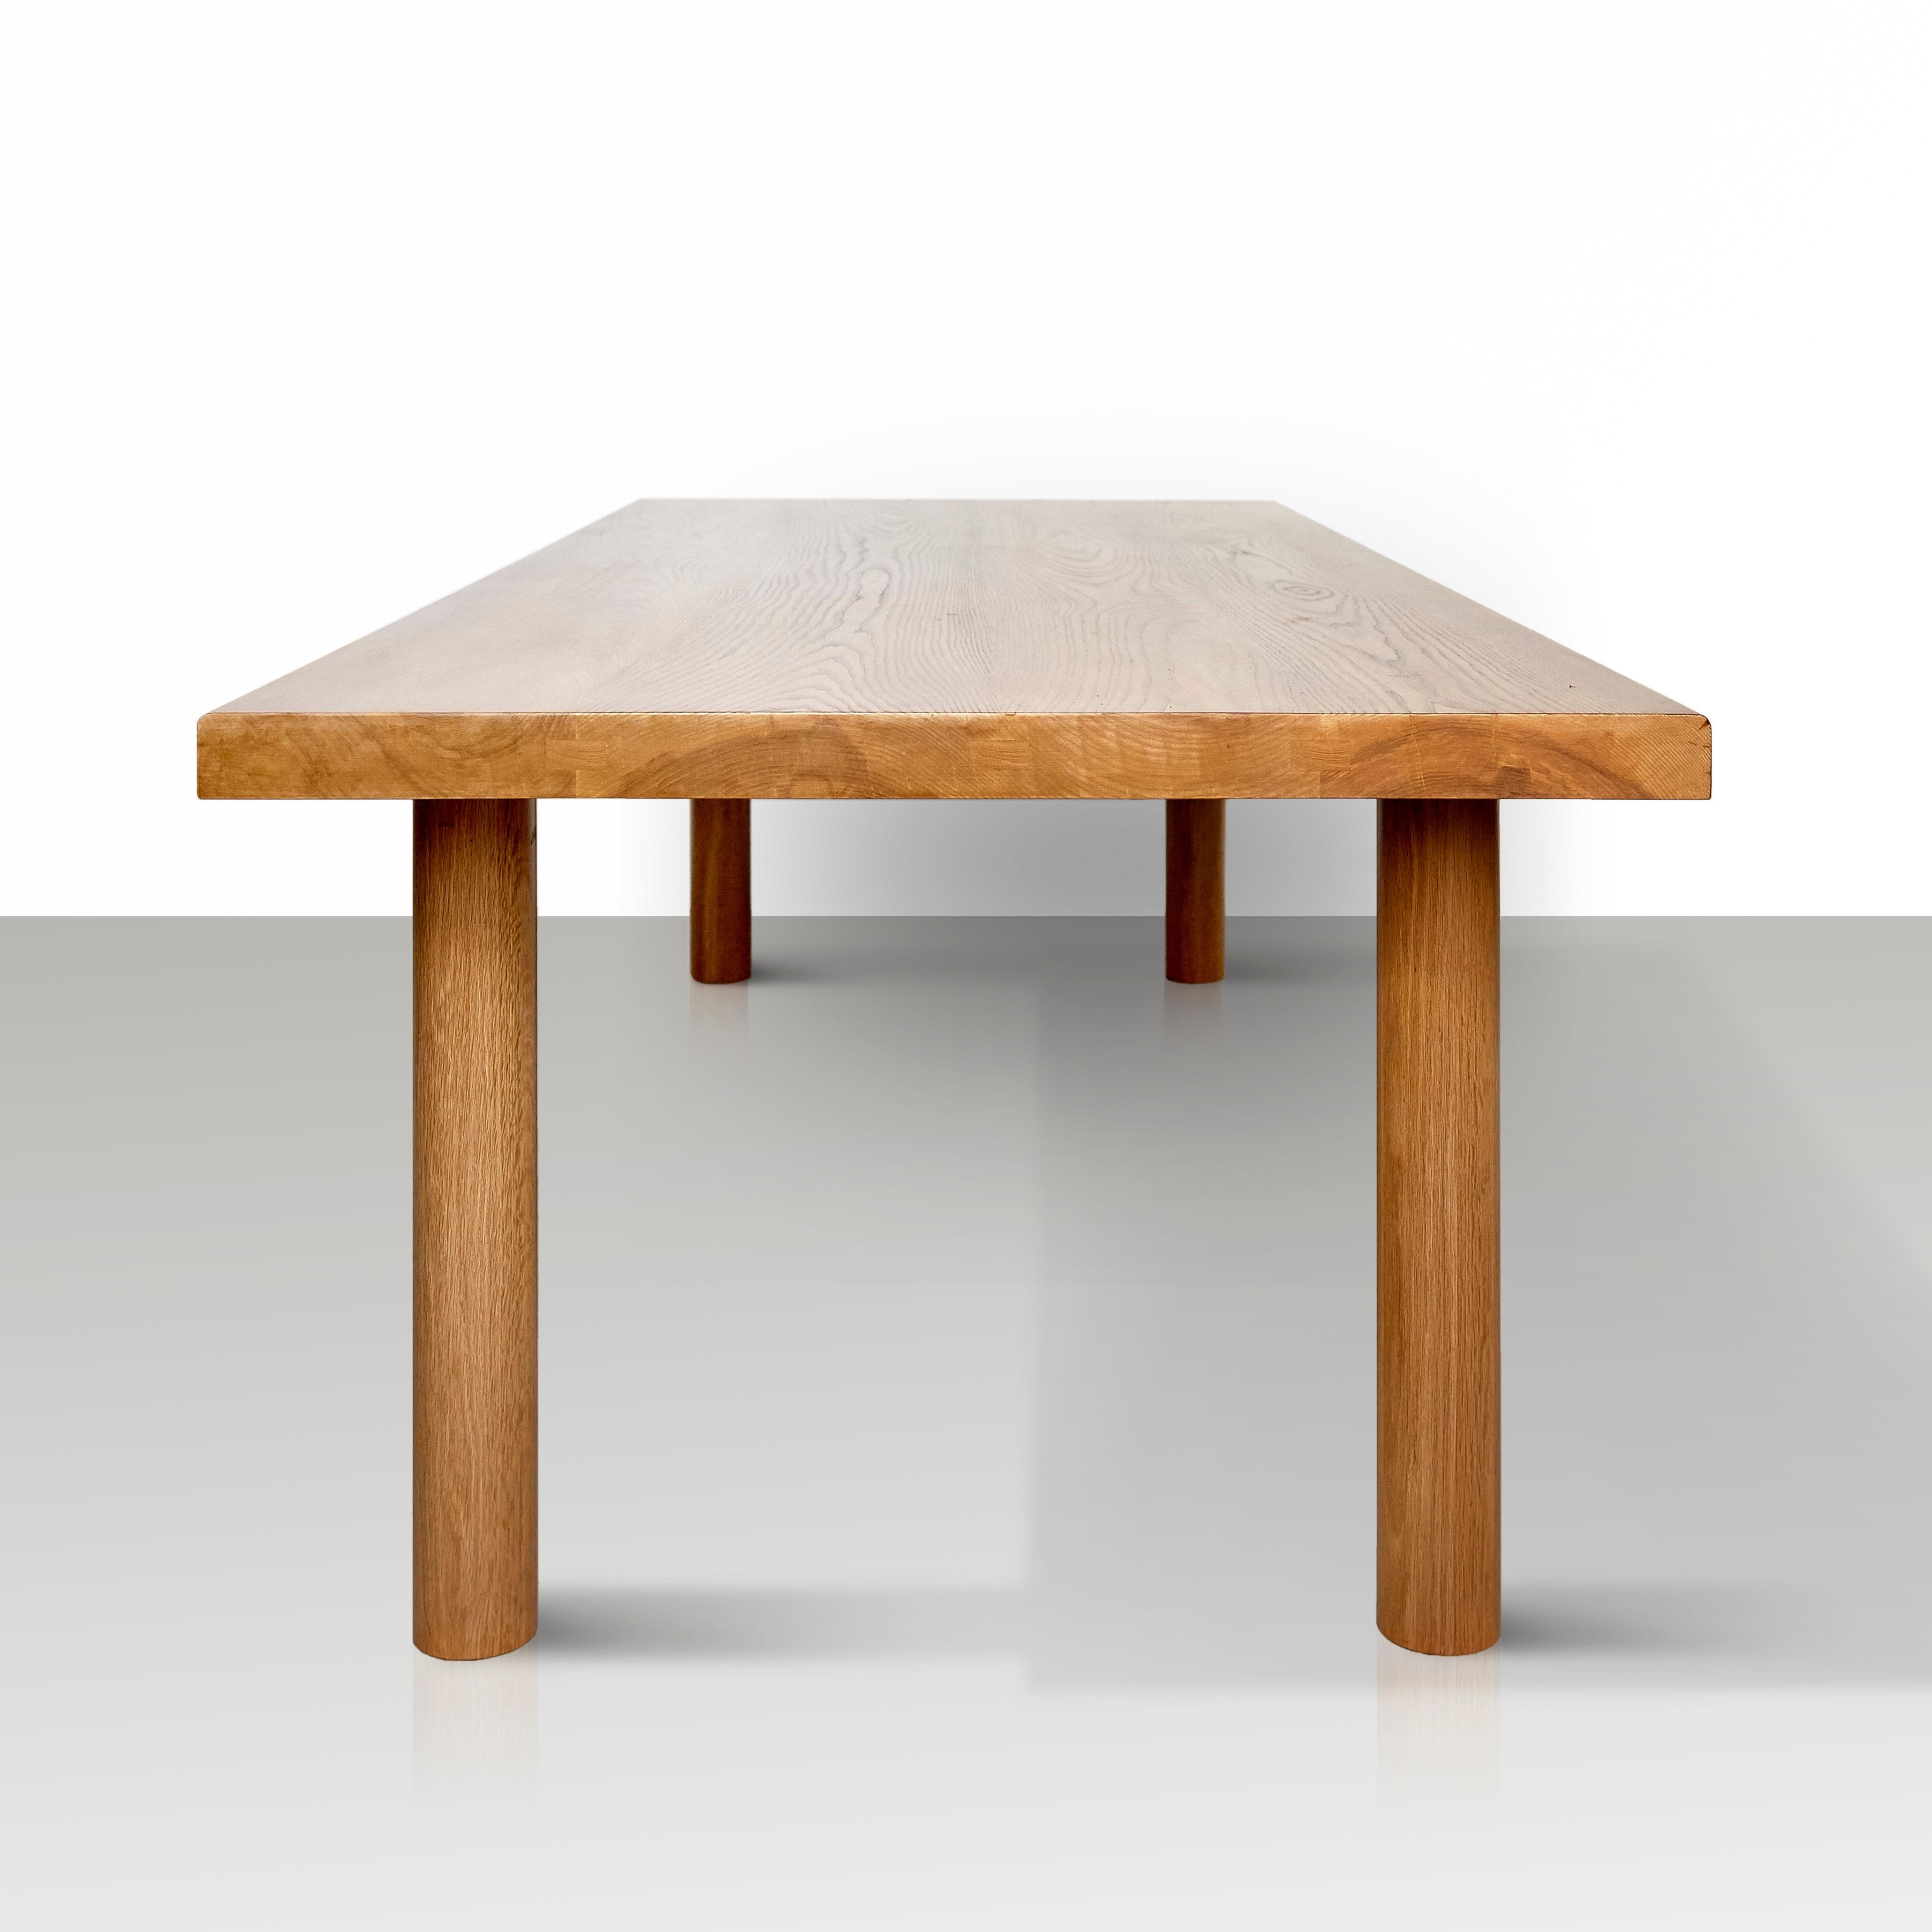 Spanish Dada Est. Contemporary Solid Ash Dining Table